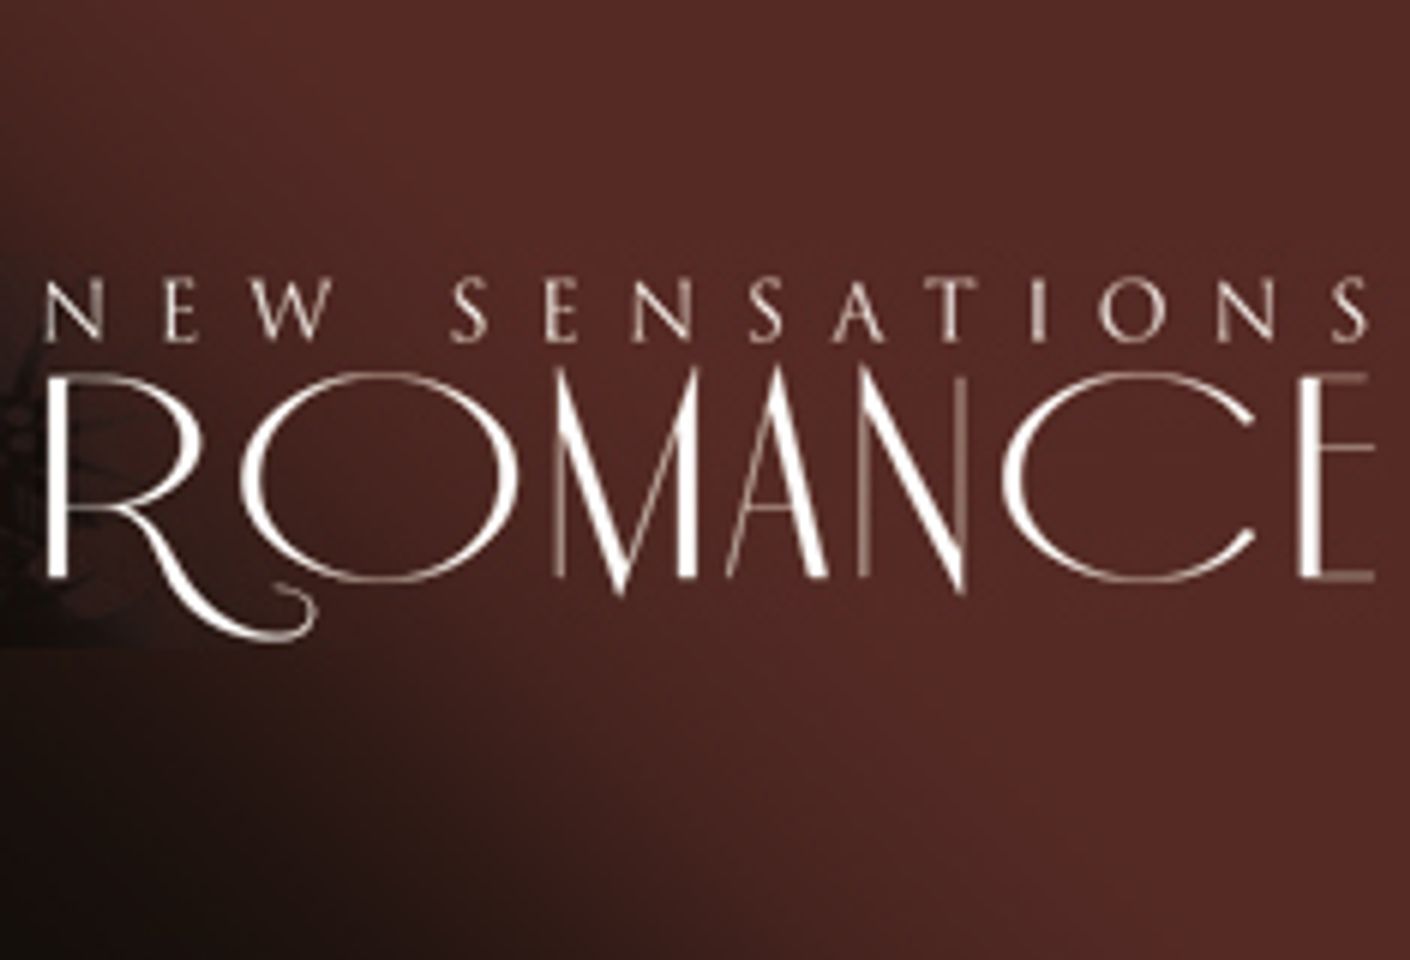 The Romance Series Named Best New Series at AVN Awards